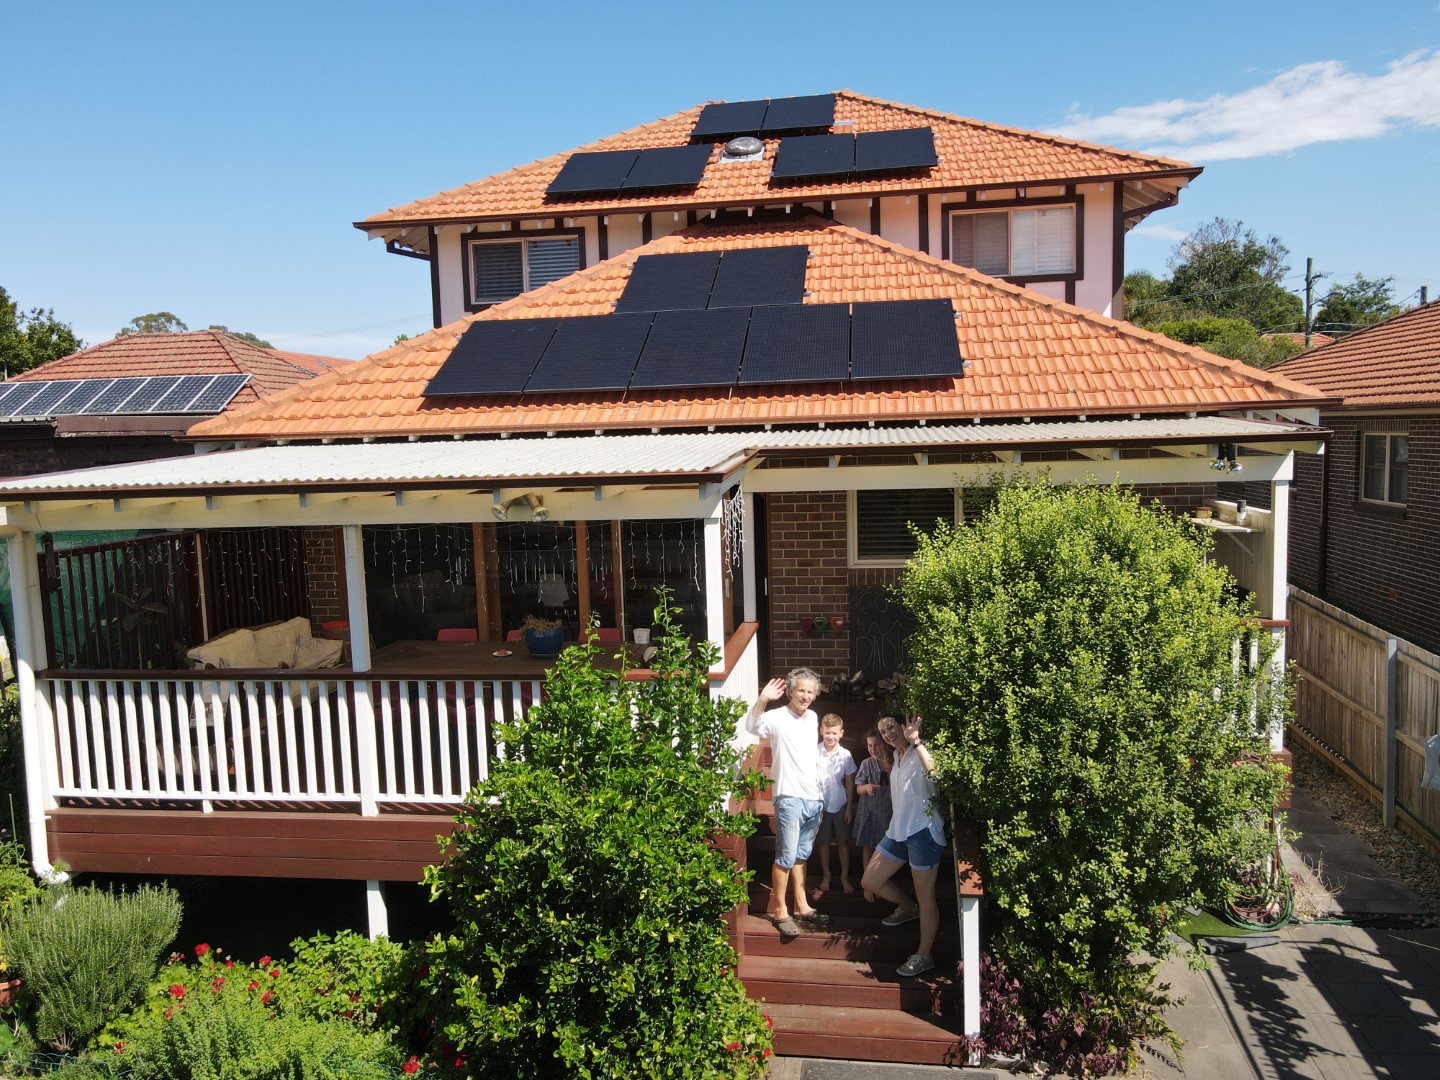 Family in front of home with solar panels